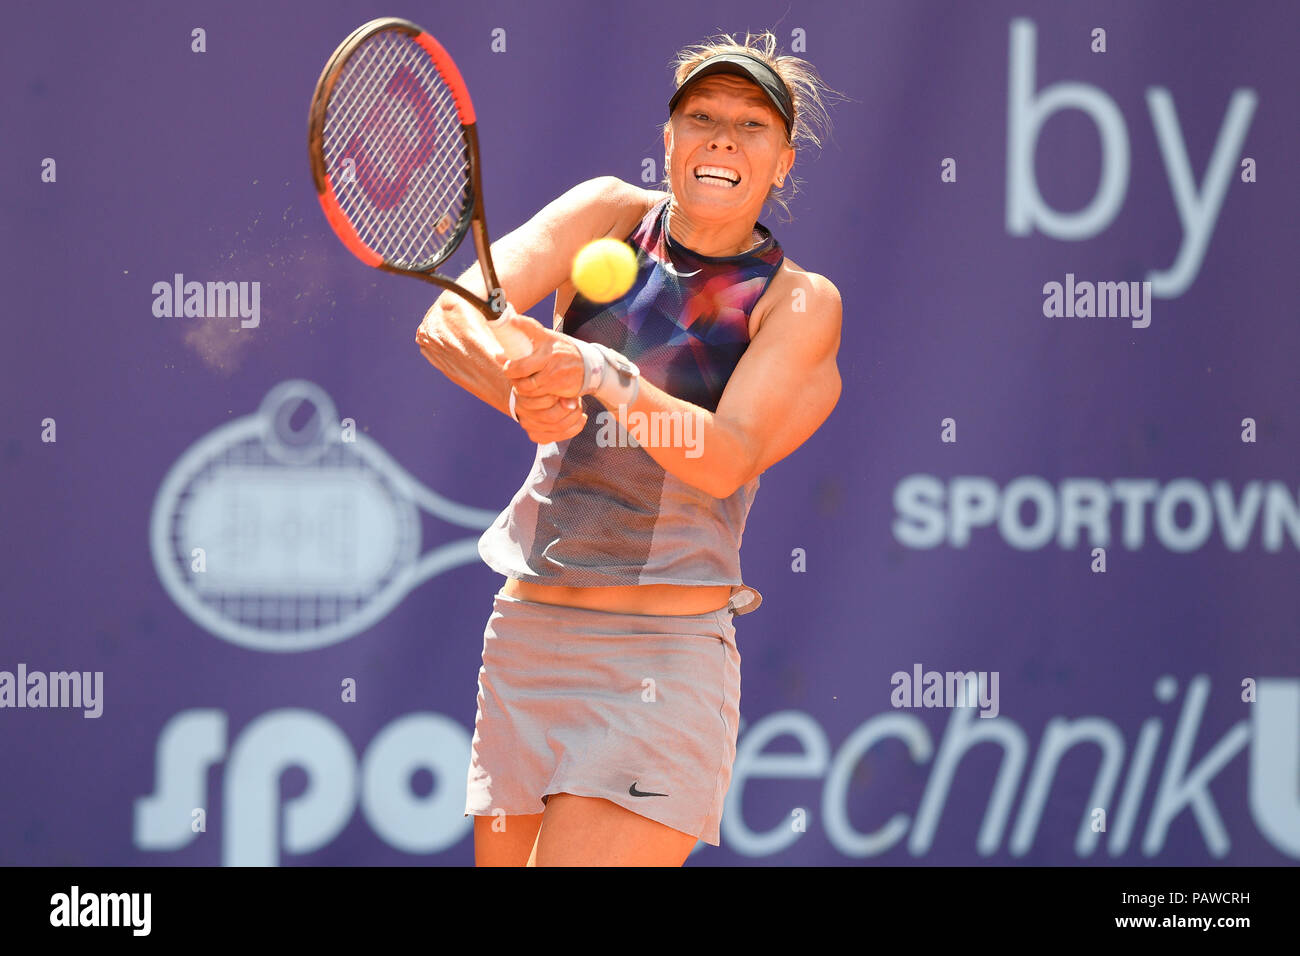 Prague, Czech Republic. 25th July, 2018. Czech Tennis player Lucie Hradecka  (pictured) in action during the match against Katerina Stewart of USA in  Advantage Cars Prague Open 2018 ITF Womens Circuit in